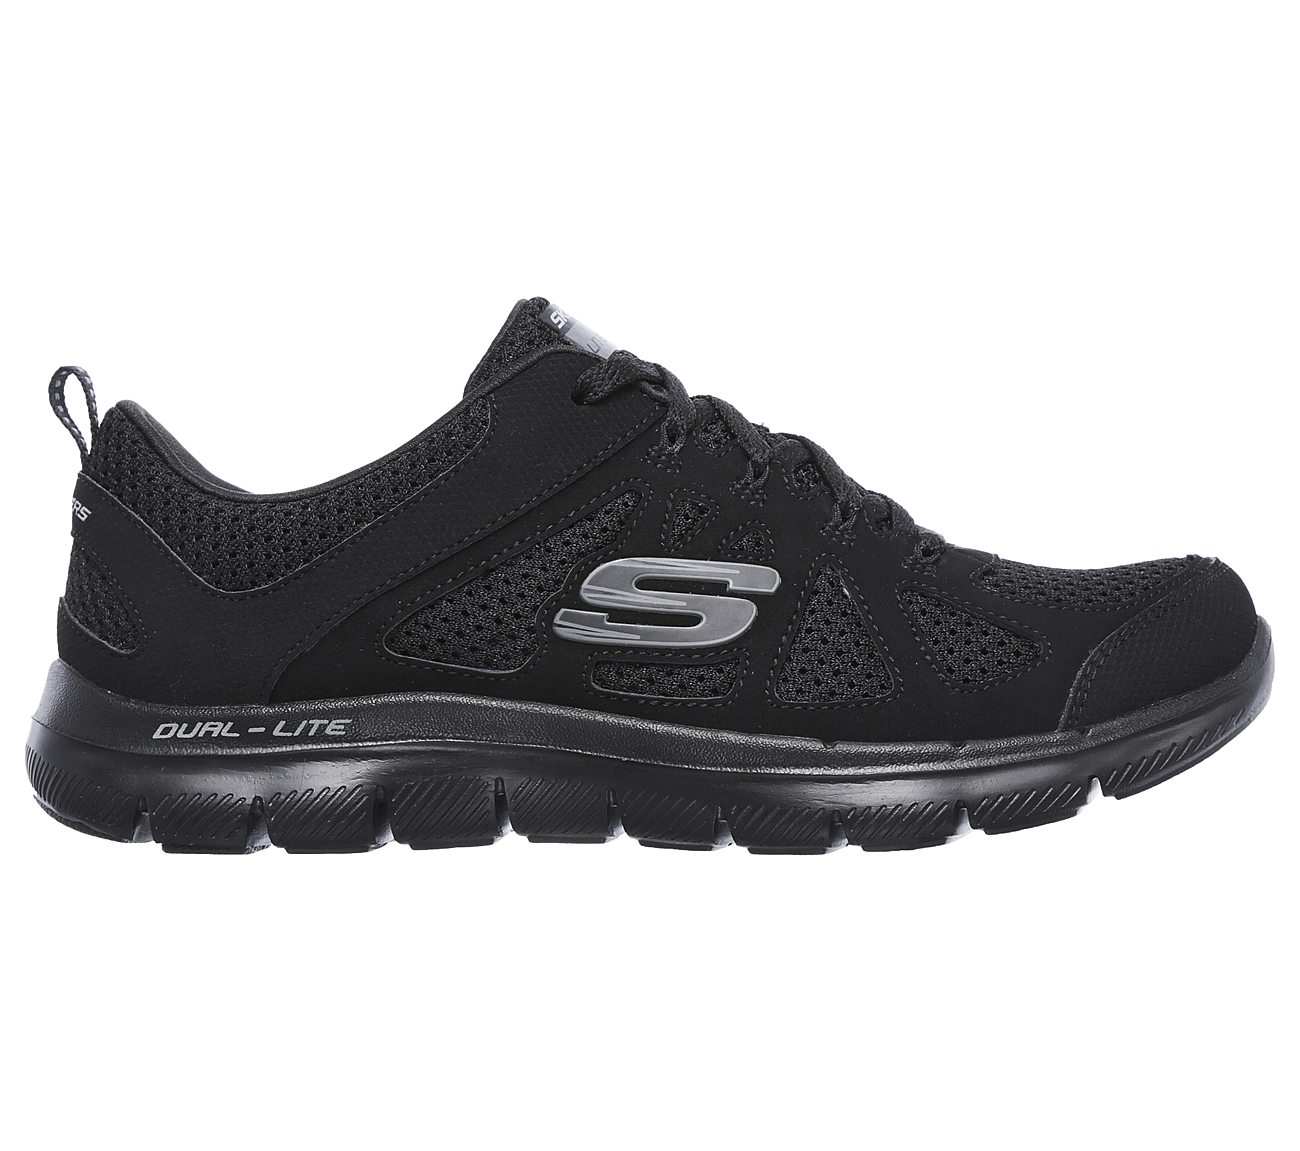 skechers flex appeal hombre Cheaper Than Retail Price> Buy Clothing ...